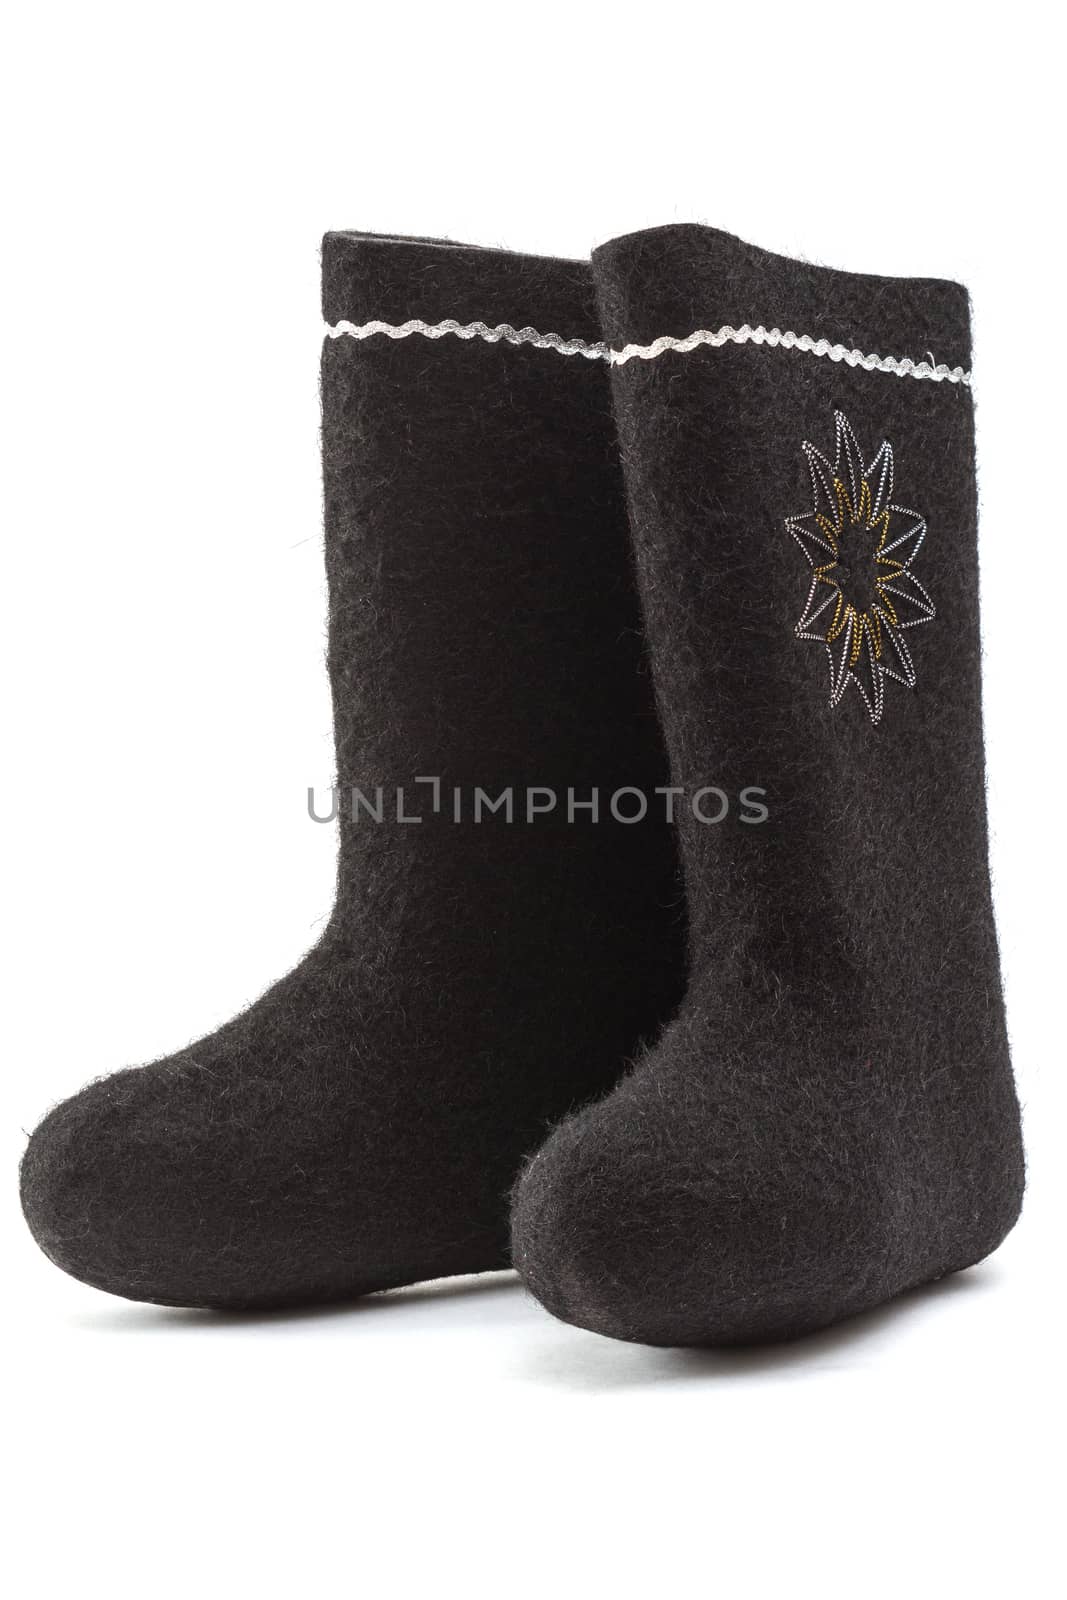 Russian valenki - black felt boots isolated on a white background